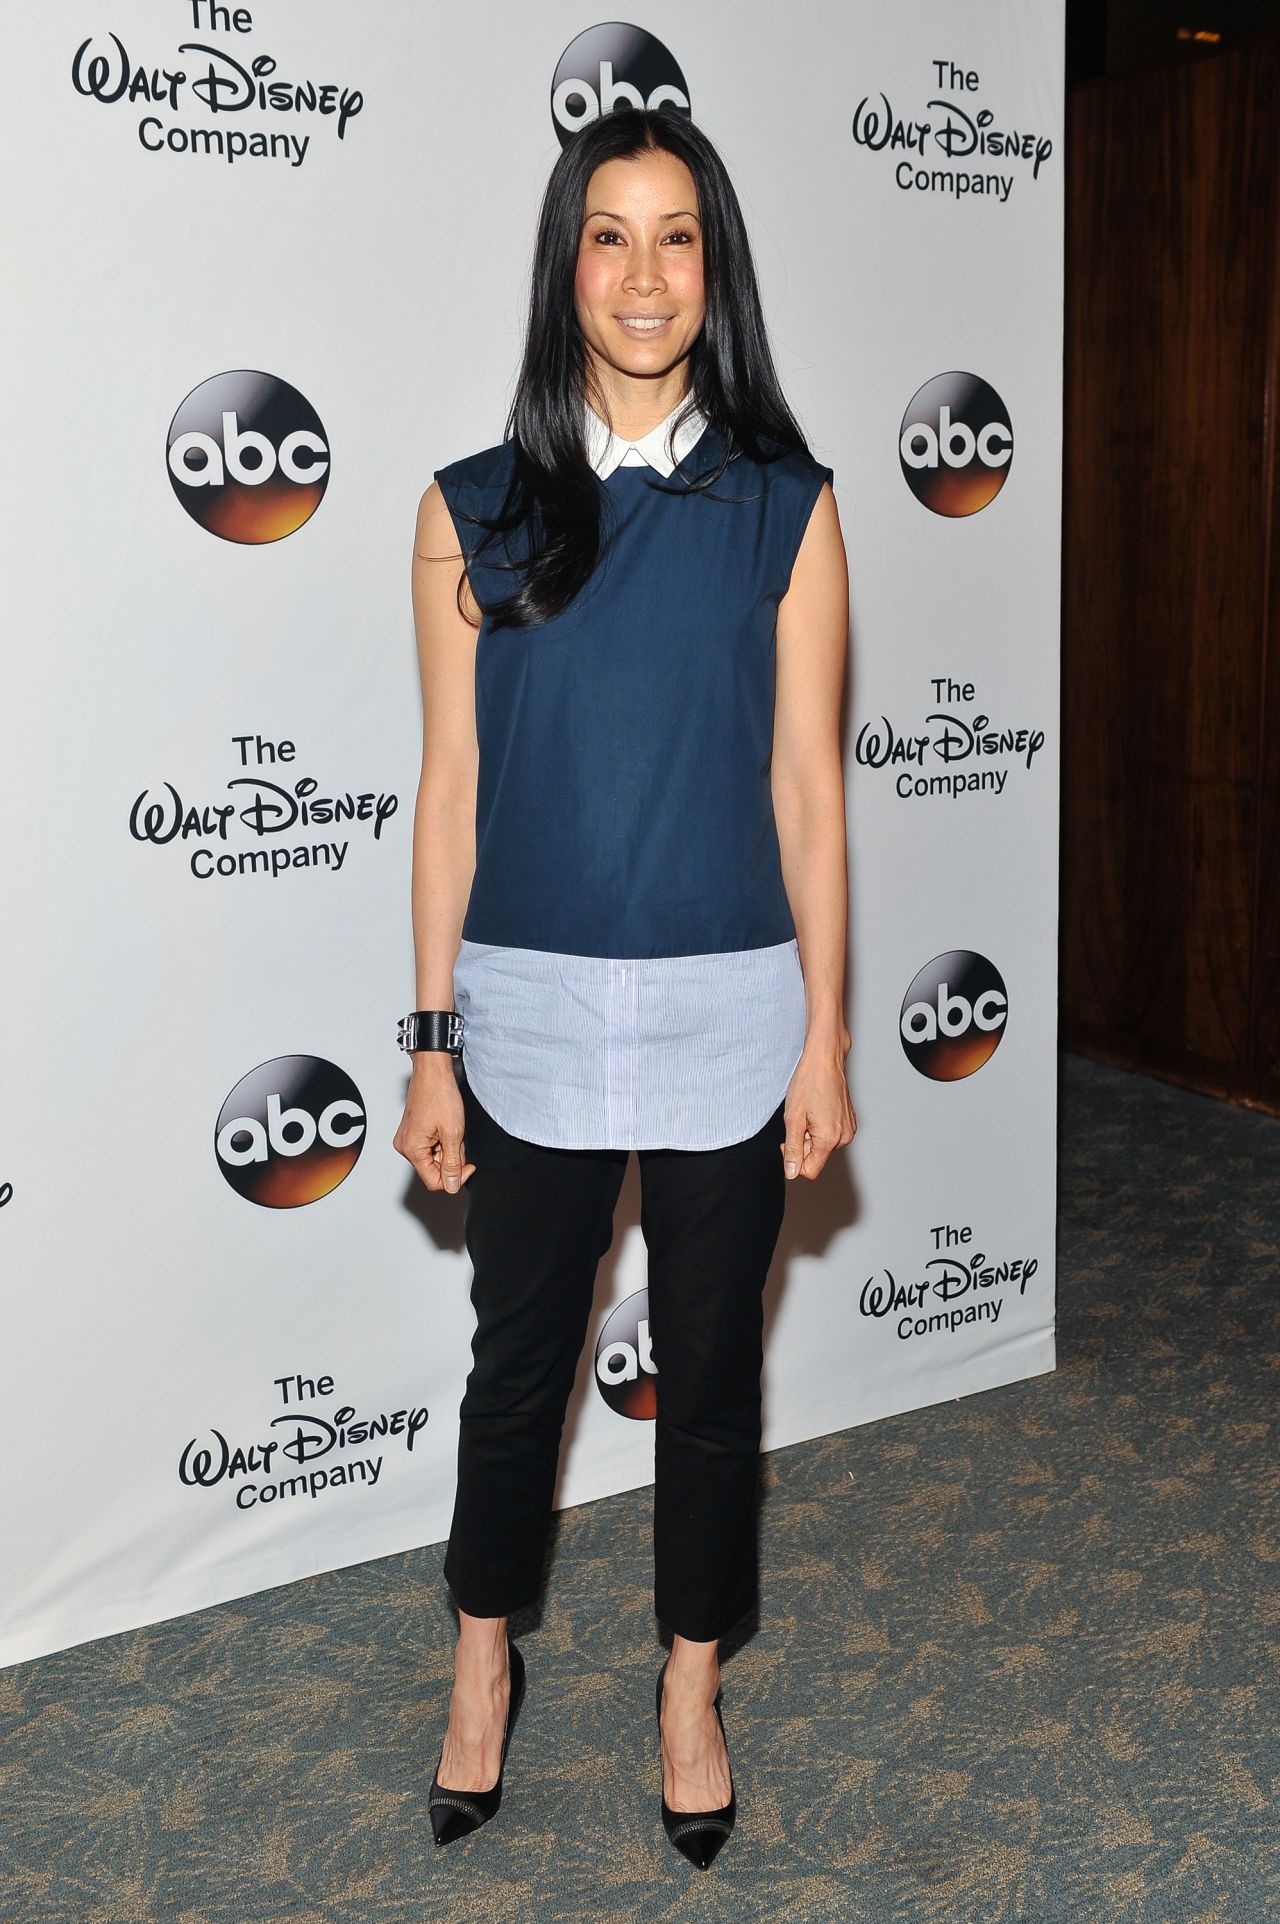 Lisa Ling attended on "The View" from 2009 to 2012. She returned to international reporting and hosted "Our America with Lisa Ling" on the OWN network and "National Geographic Ultimate Explorer." Ling now hosts <a href="http://www.cnn.com/shows/this-is-life-with-lisa-ling">"This Is Life with Lisa Ling" for CNN</a>.